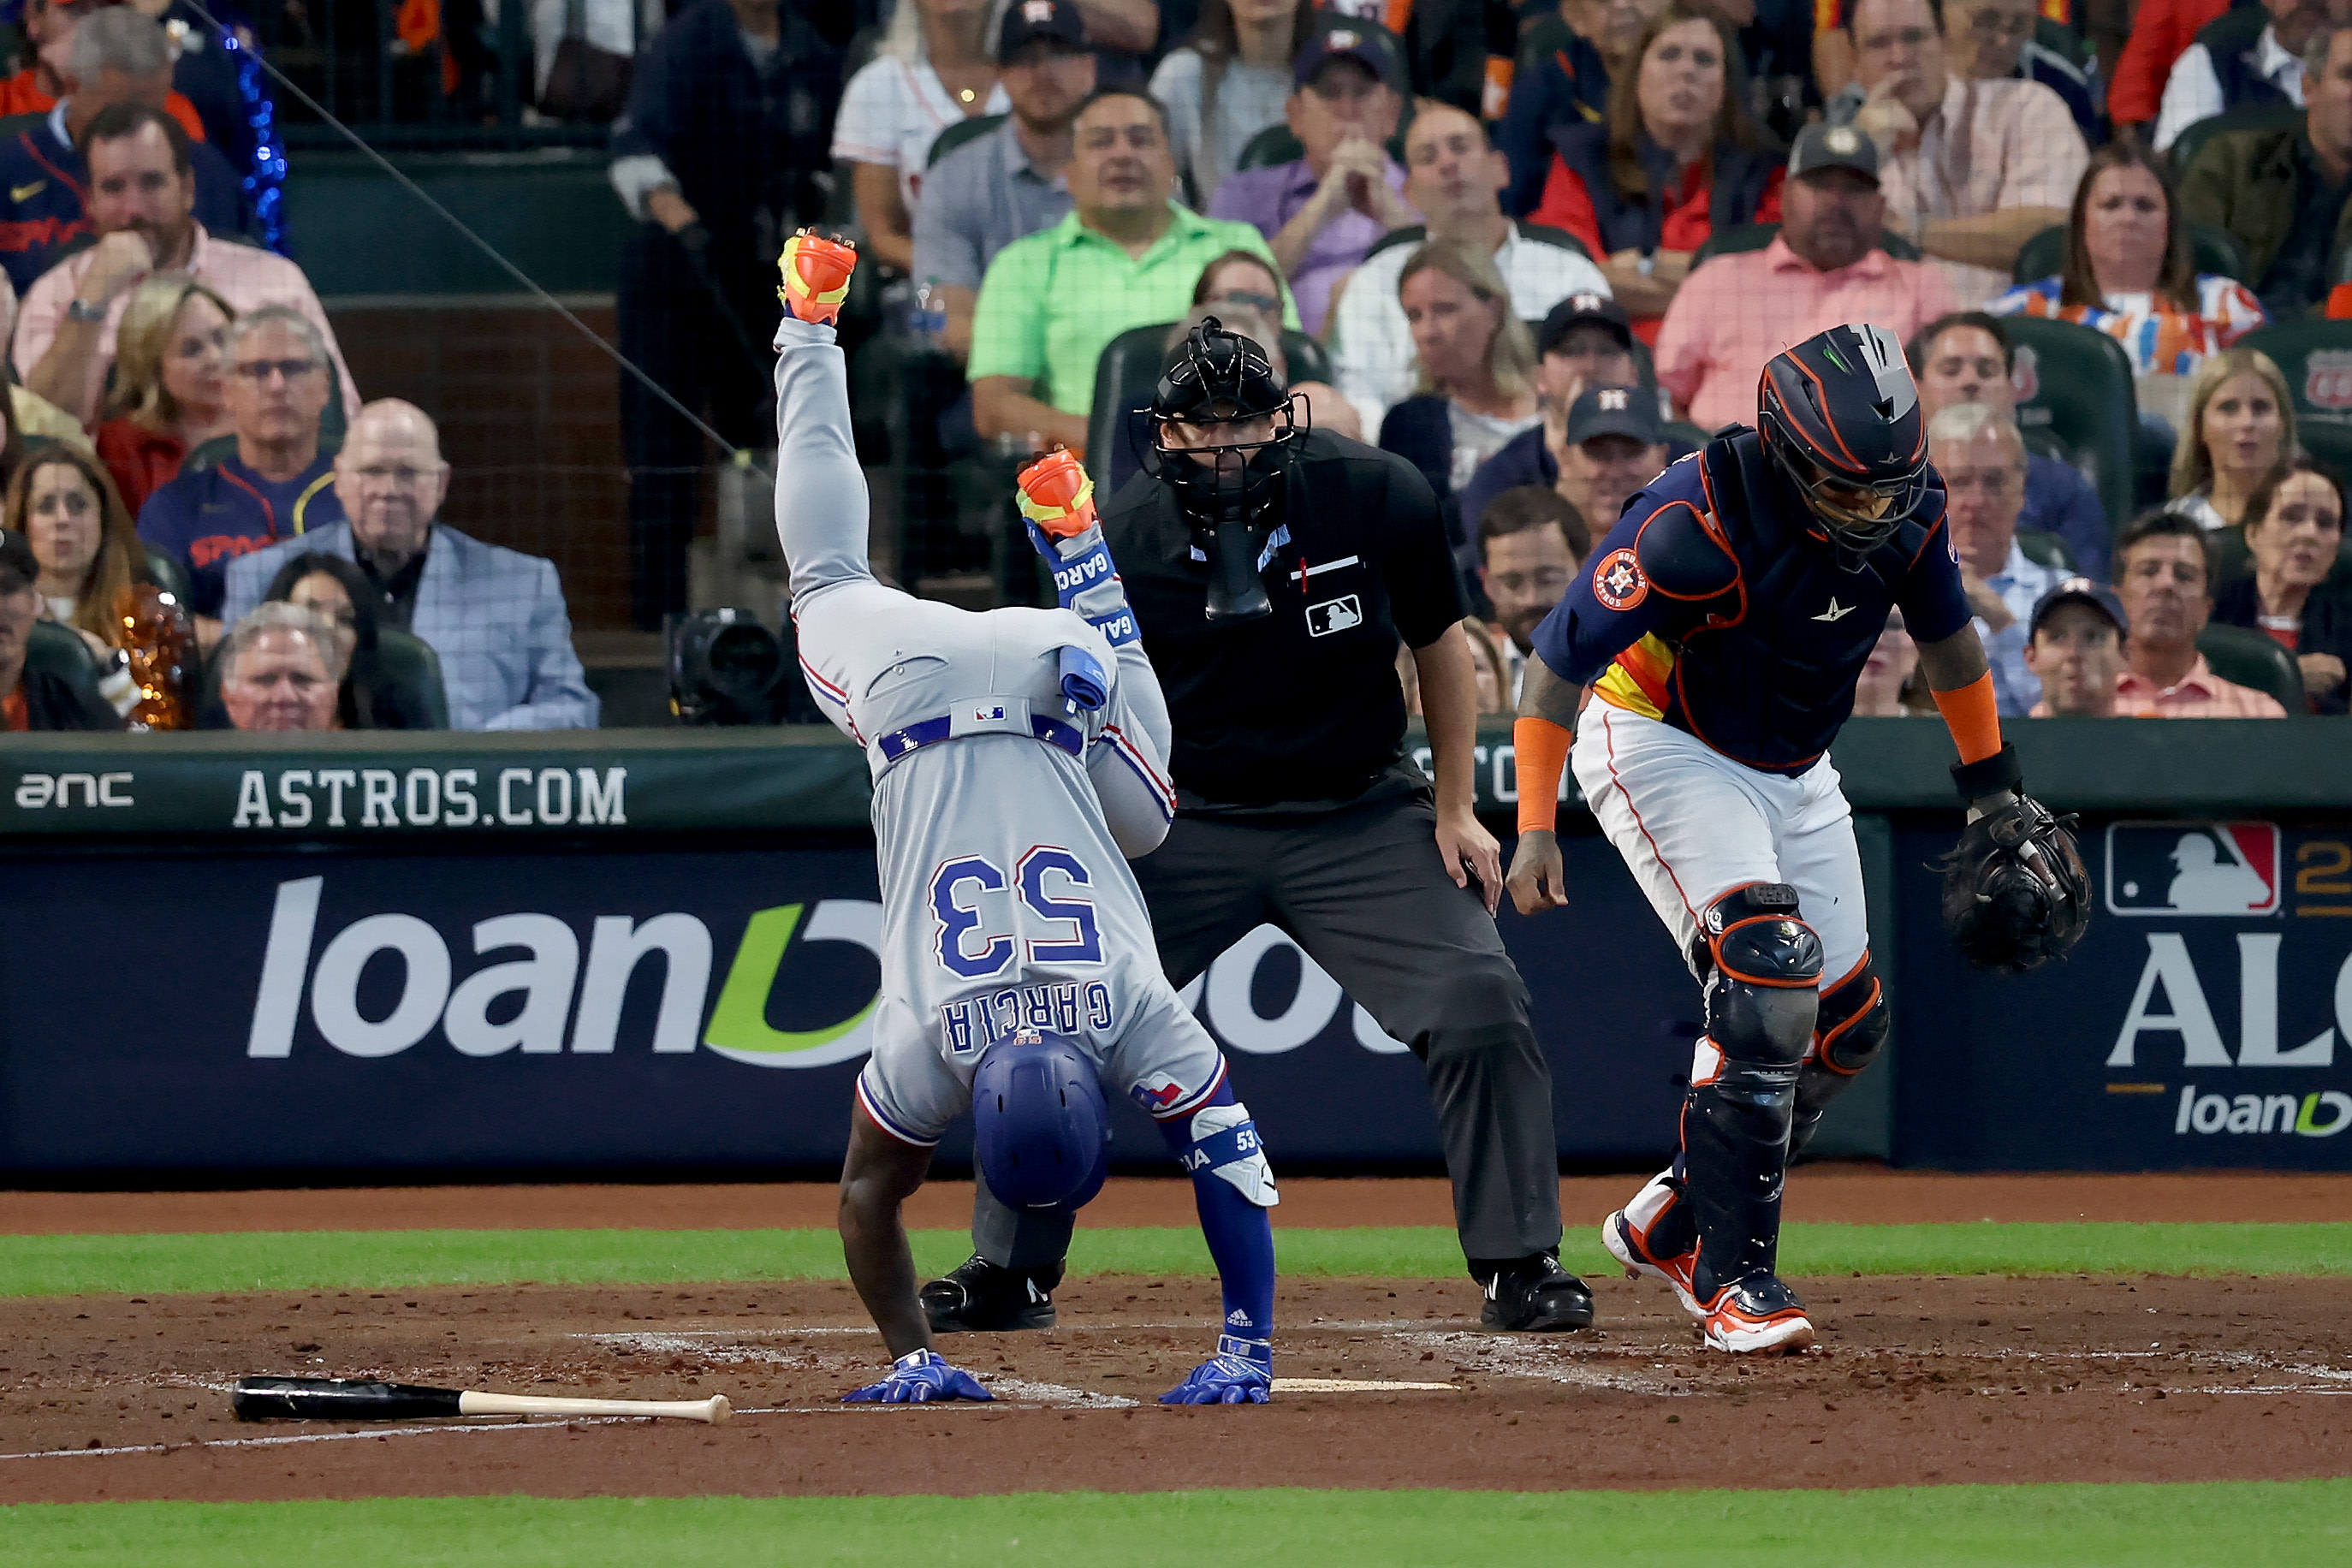 Astros Go To Their Seventh Straight ALCS - The Crawfish Boxes